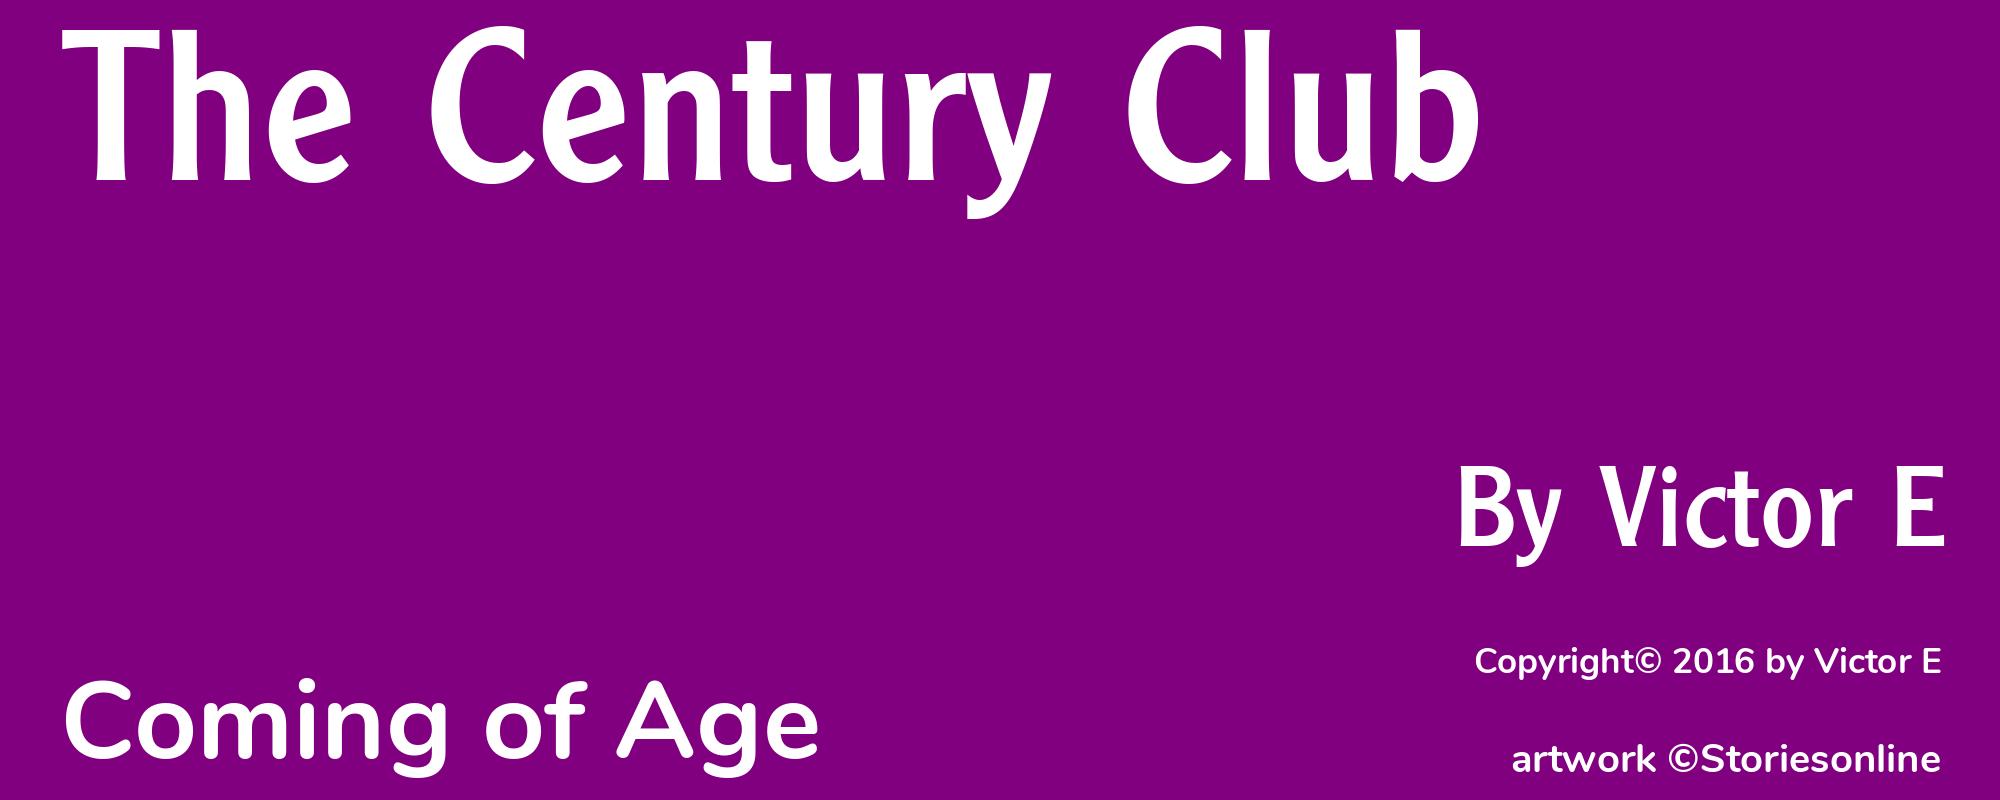 The Century Club - Cover